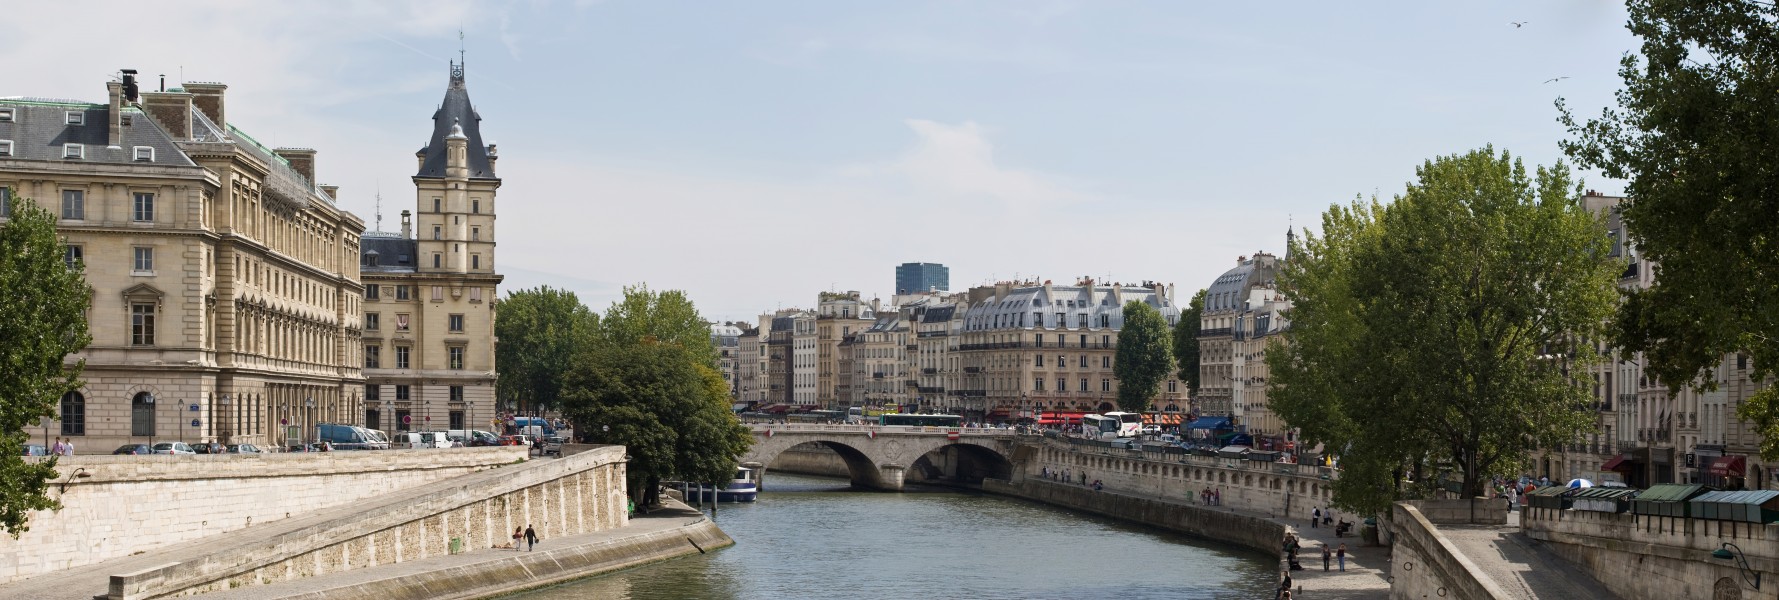 View towards Pont Saint-Michel from Pont Neuf, Aug 2010, v.2